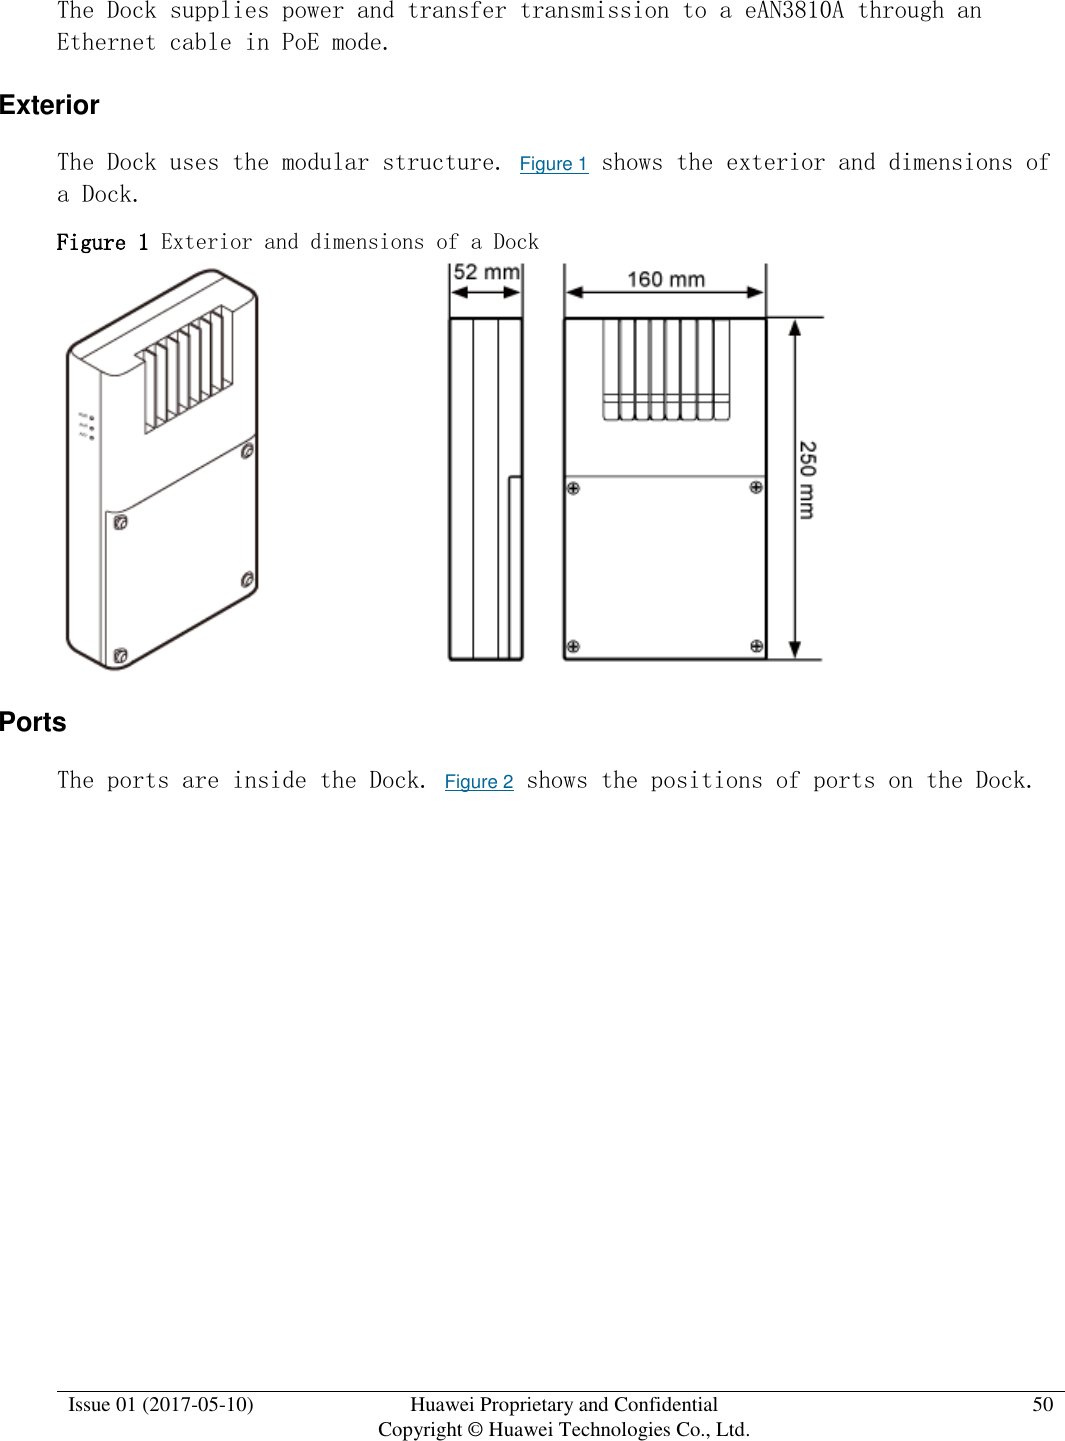  Issue 01 (2017-05-10) Huawei Proprietary and Confidential      Copyright © Huawei Technologies Co., Ltd. 50  The Dock supplies power and transfer transmission to a eAN3810A through an Ethernet cable in PoE mode. Exterior The Dock uses the modular structure. Figure 1 shows the exterior and dimensions of a Dock. Figure 1 Exterior and dimensions of a Dock   Ports The ports are inside the Dock. Figure 2 shows the positions of ports on the Dock. 